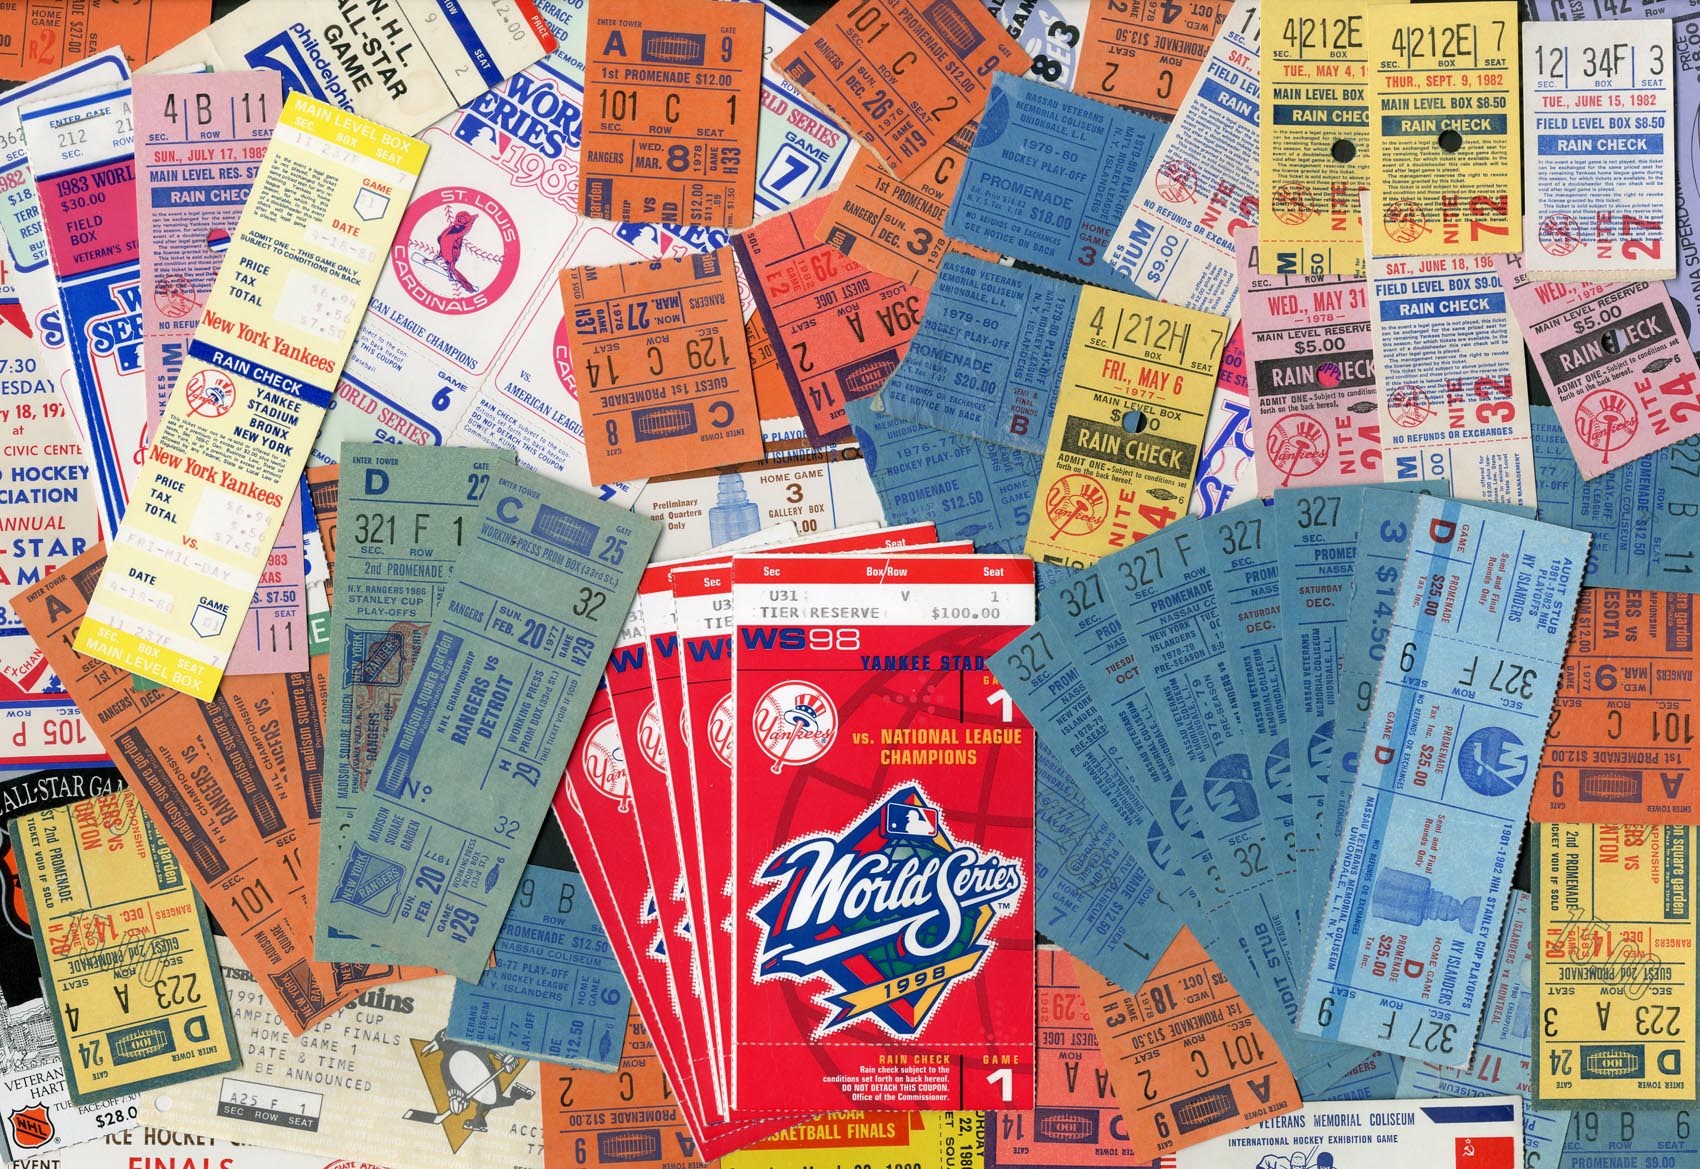 Tickets, Publications & Pins - Multi-Sport Ticket Collection from Big Time Sports Agent (190+)